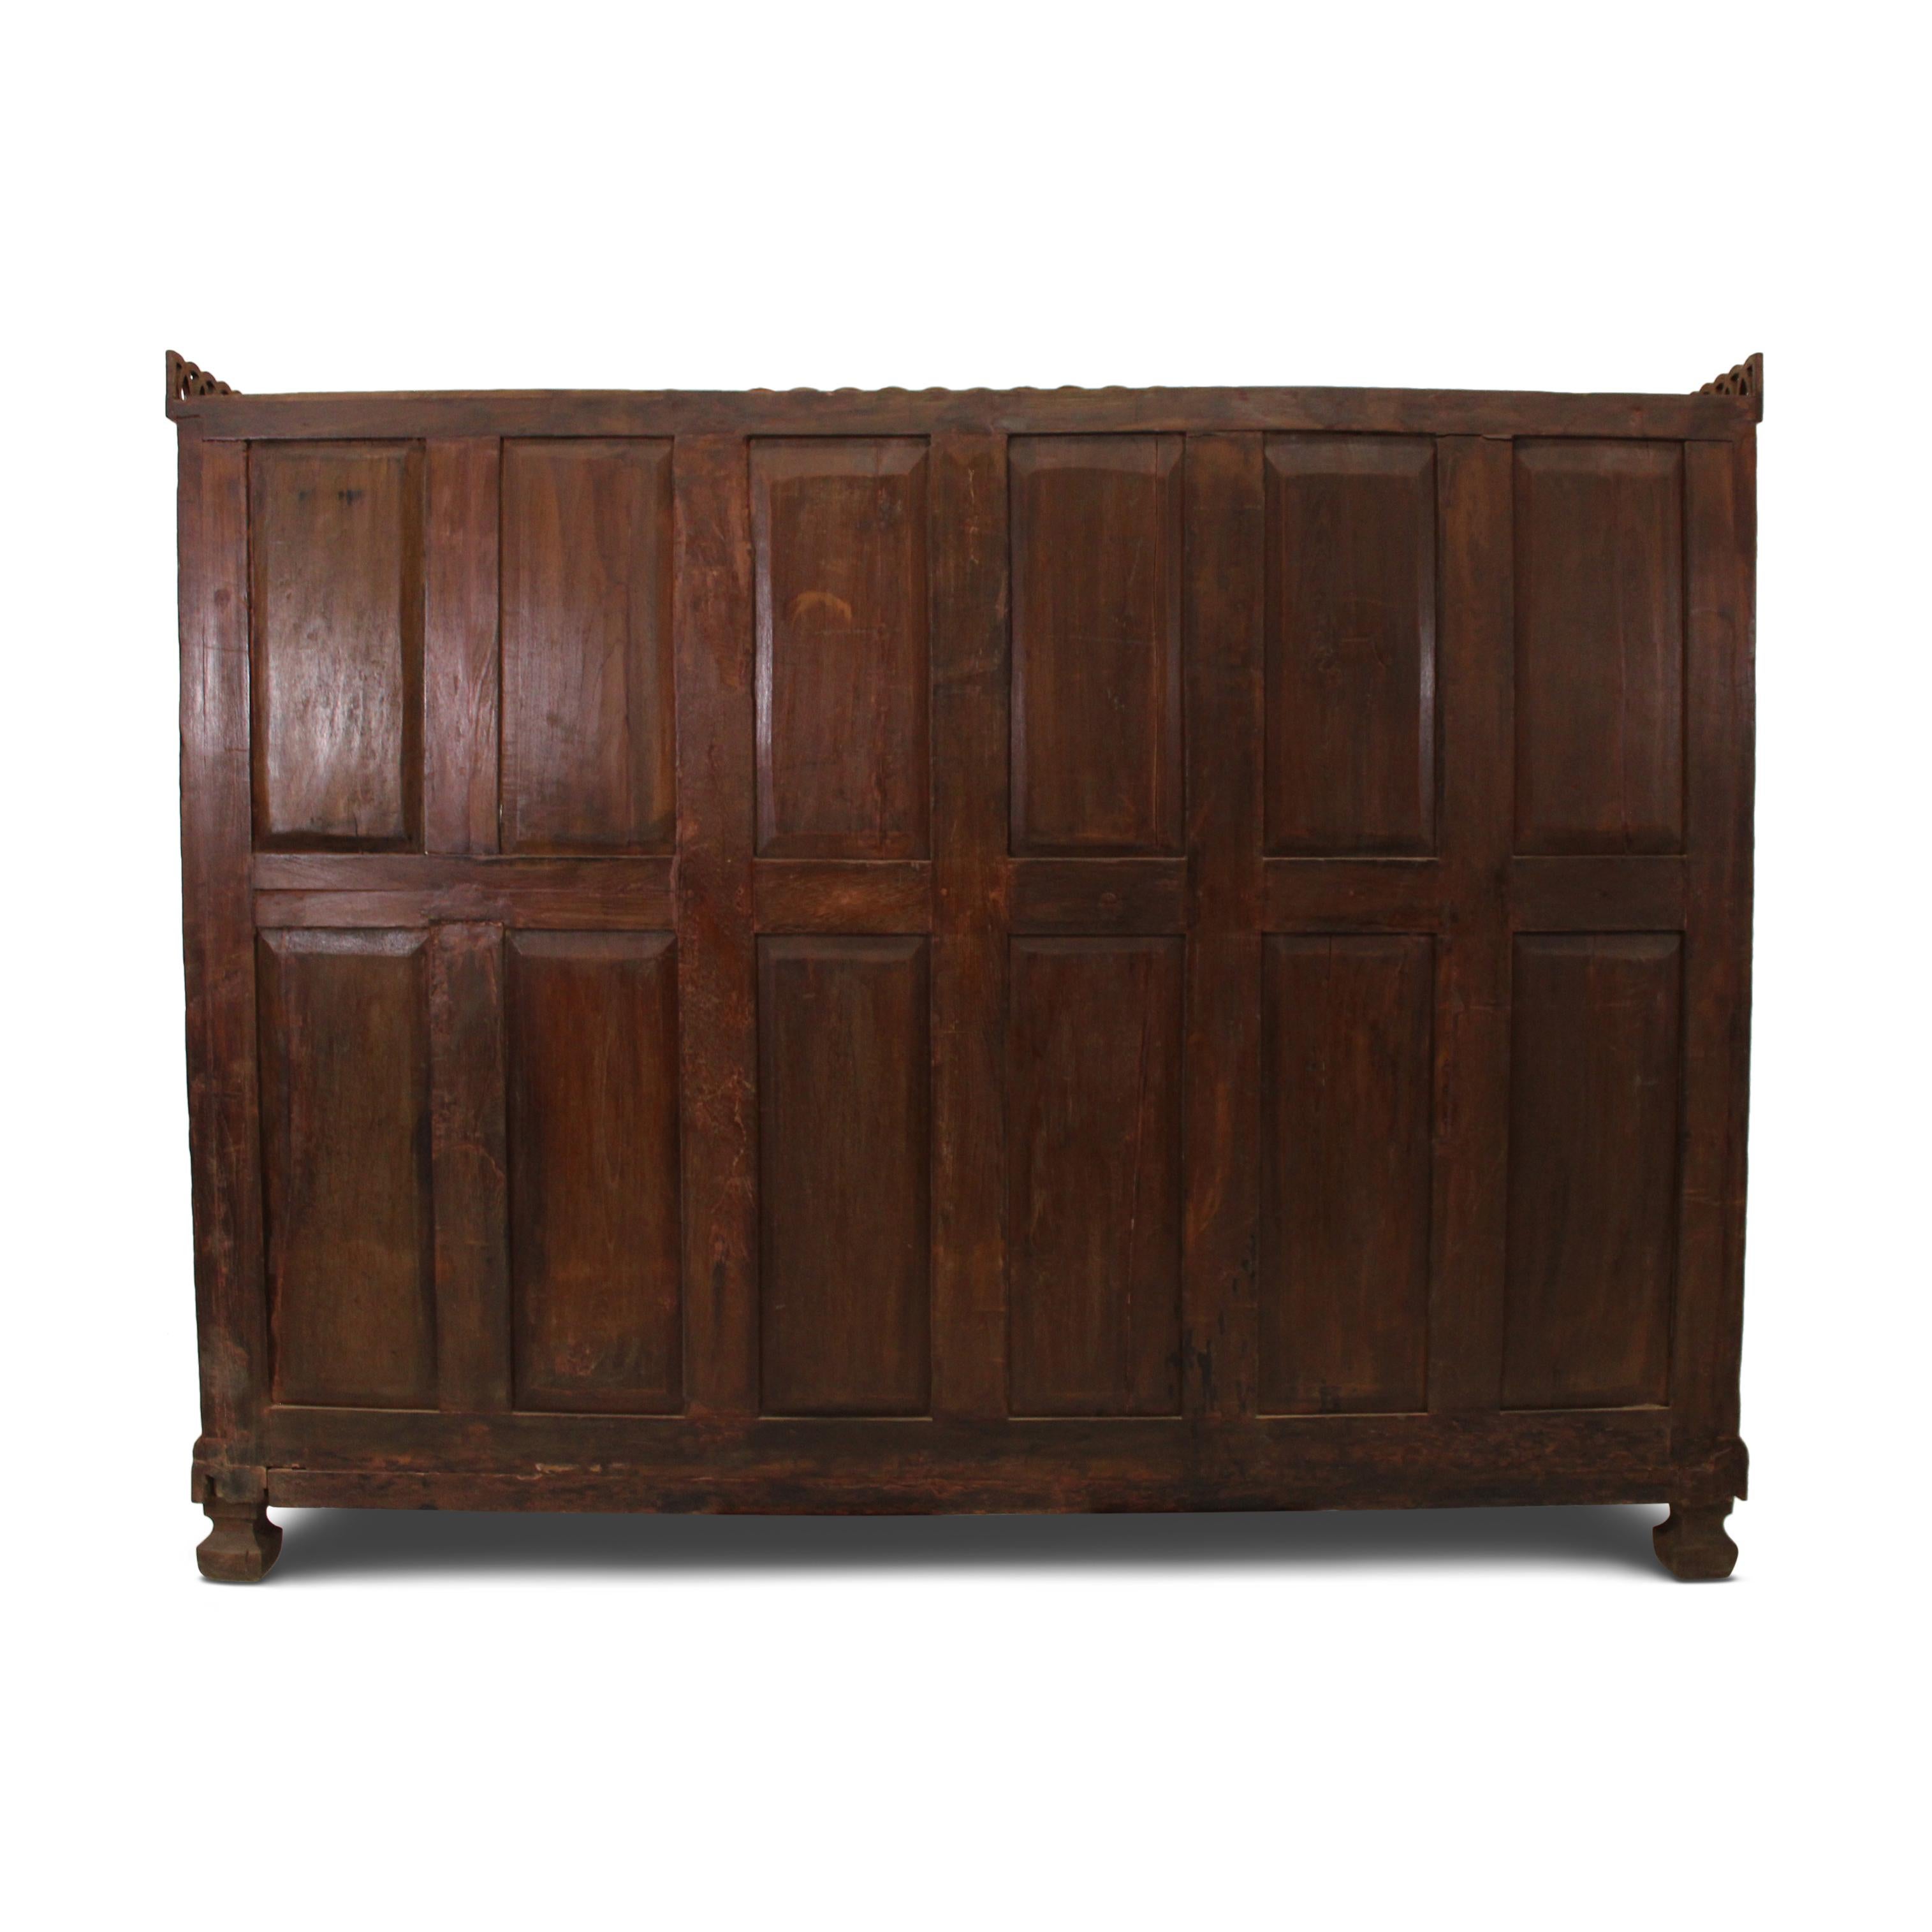 Carved Teak Bookcase From an Indian Palace